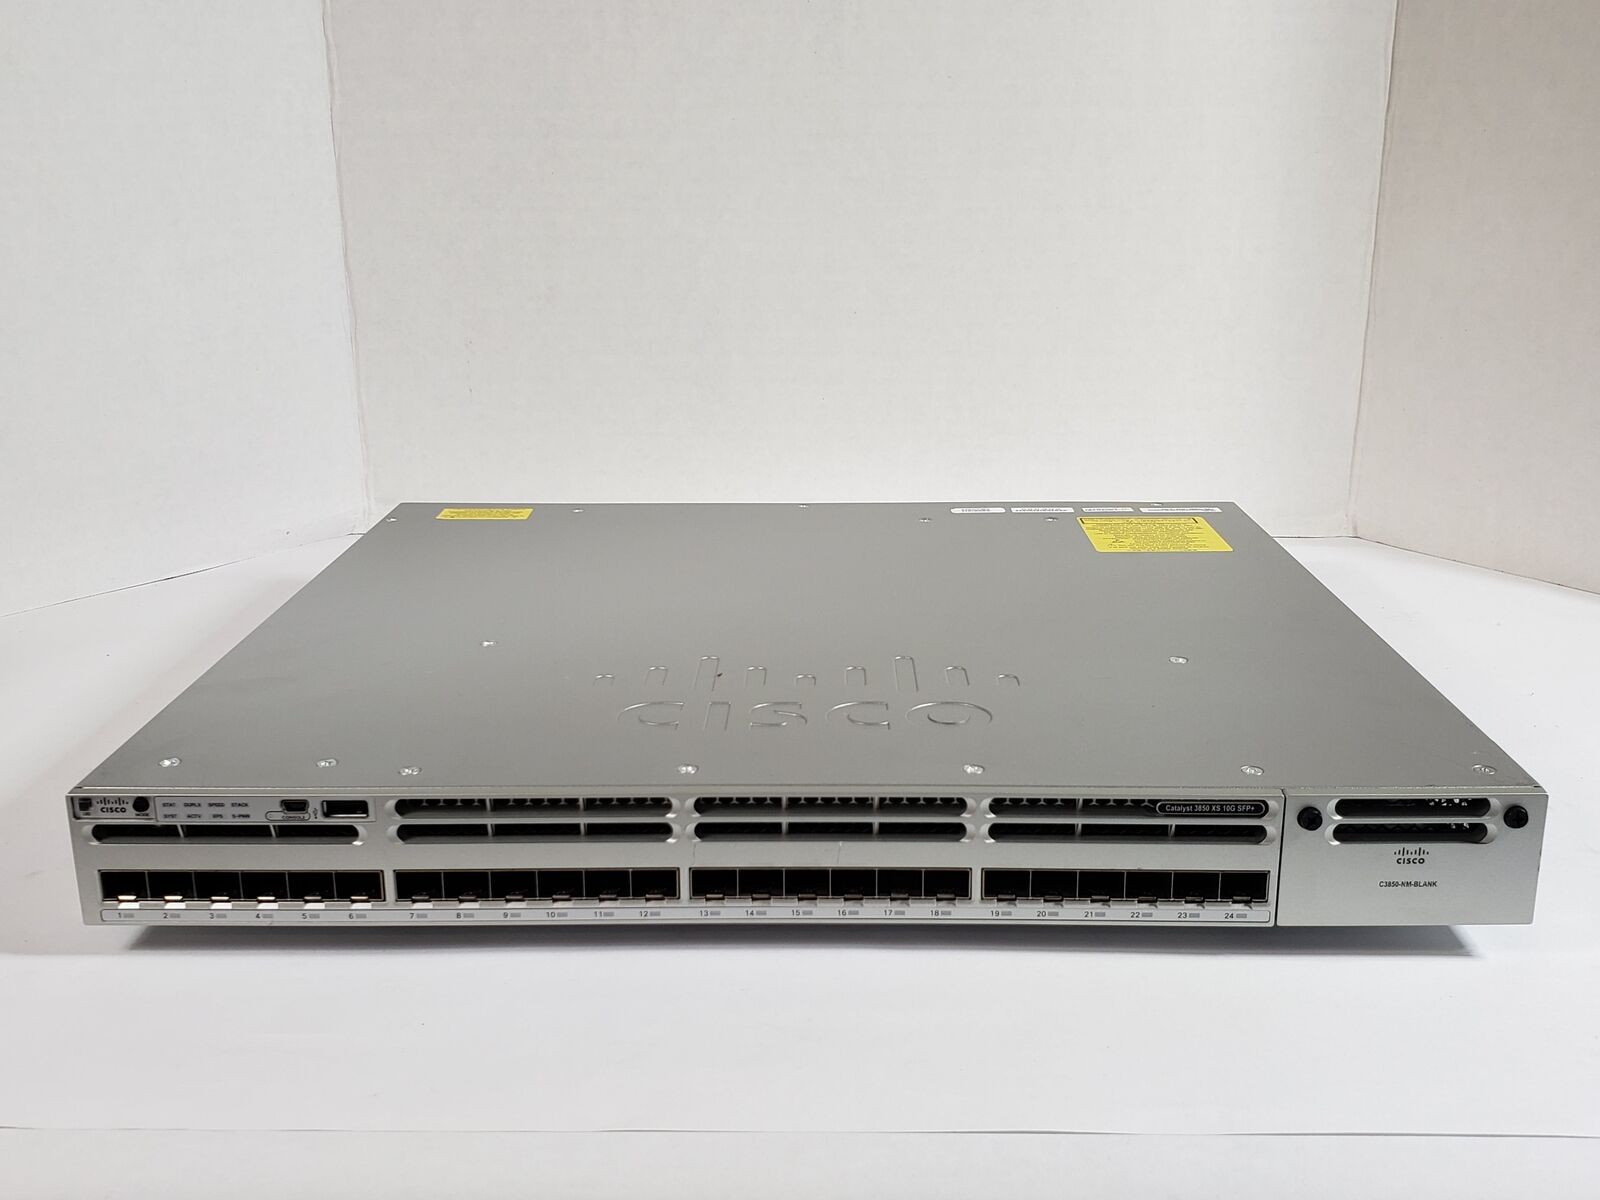 CISCO -USED- WS-C3850-24XS-S Catalyst 3850 Network Switch.